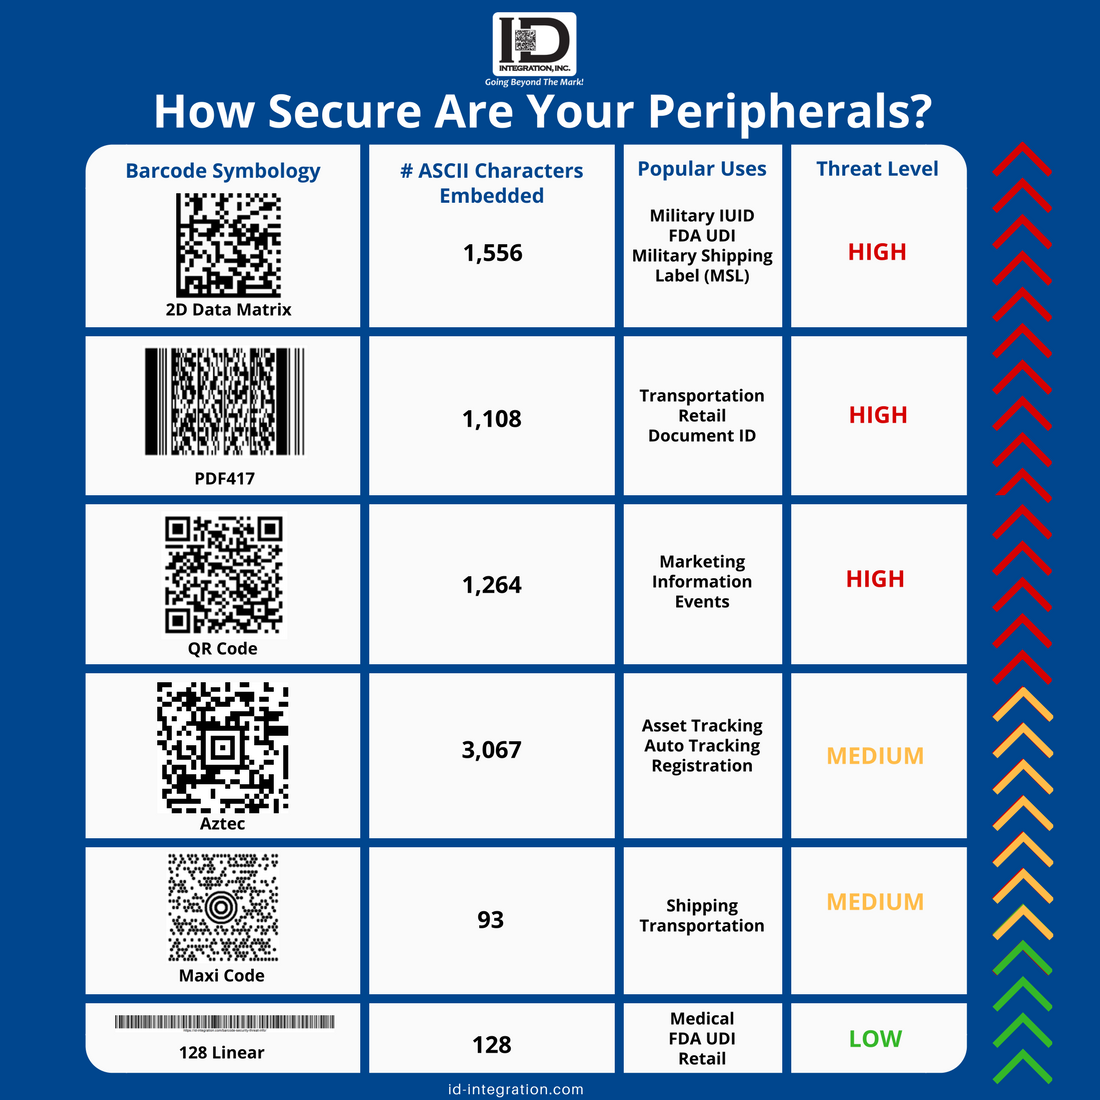 Today’s 2D barcodes are capable of storing upwards of 2000 keystroke characters. Examine the potential risk associated with each barcode symbology in our “How Secure Are Your Peripherals?” chart.